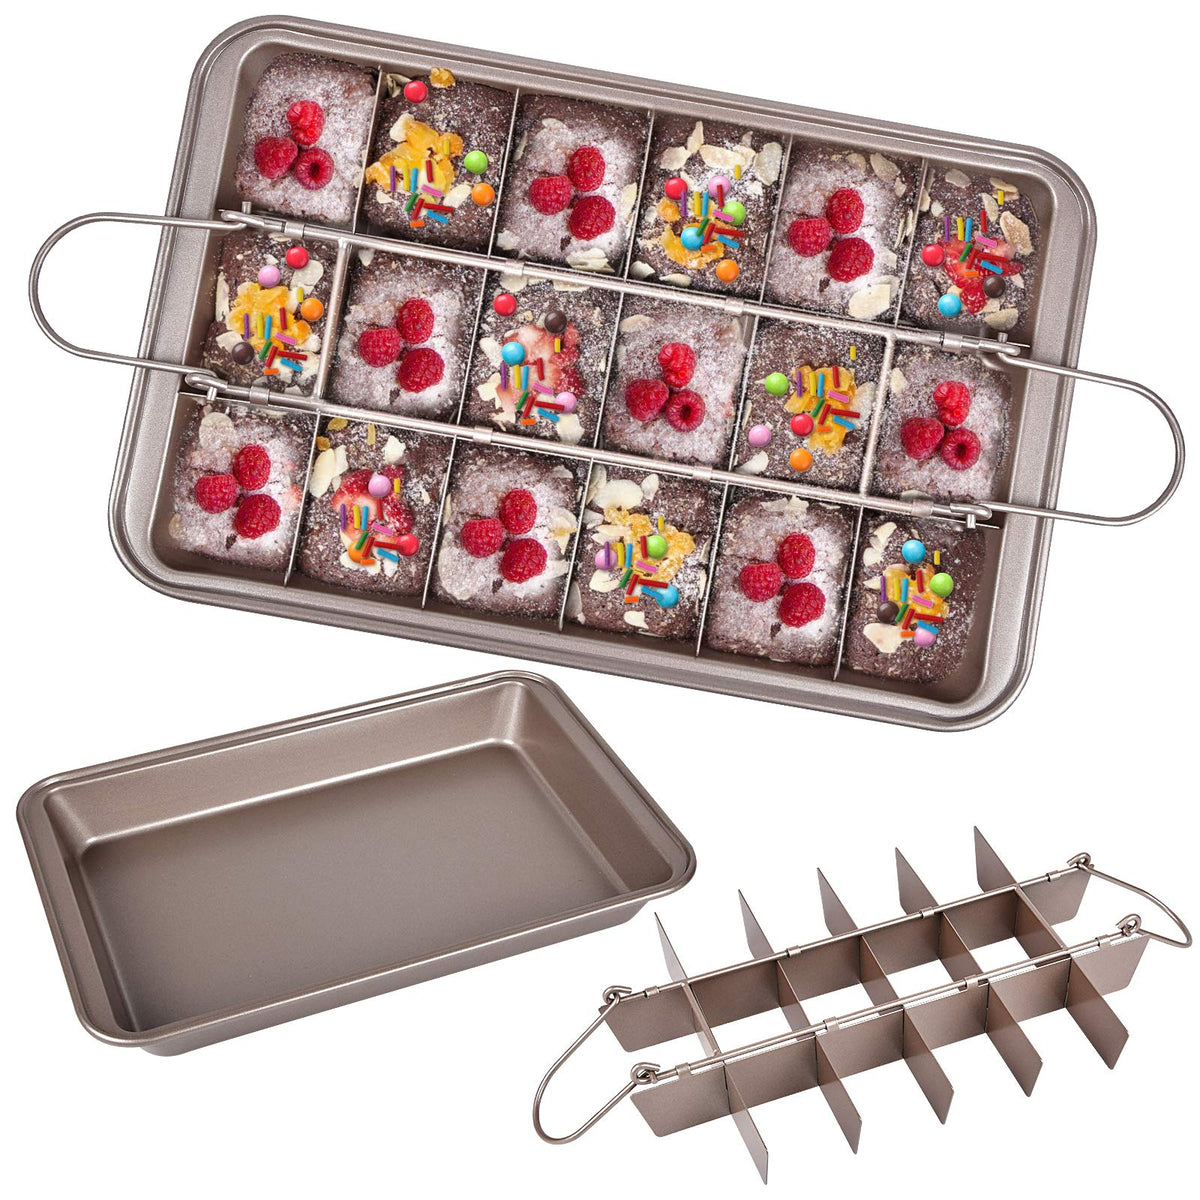  SILIVO Silicone Brownie Pan with Dividers - 2 Pack 12-Cavity  Non-Stick Silicone Molds for Brownie Bites, Fudges and Minecraft Cakes:  Home & Kitchen